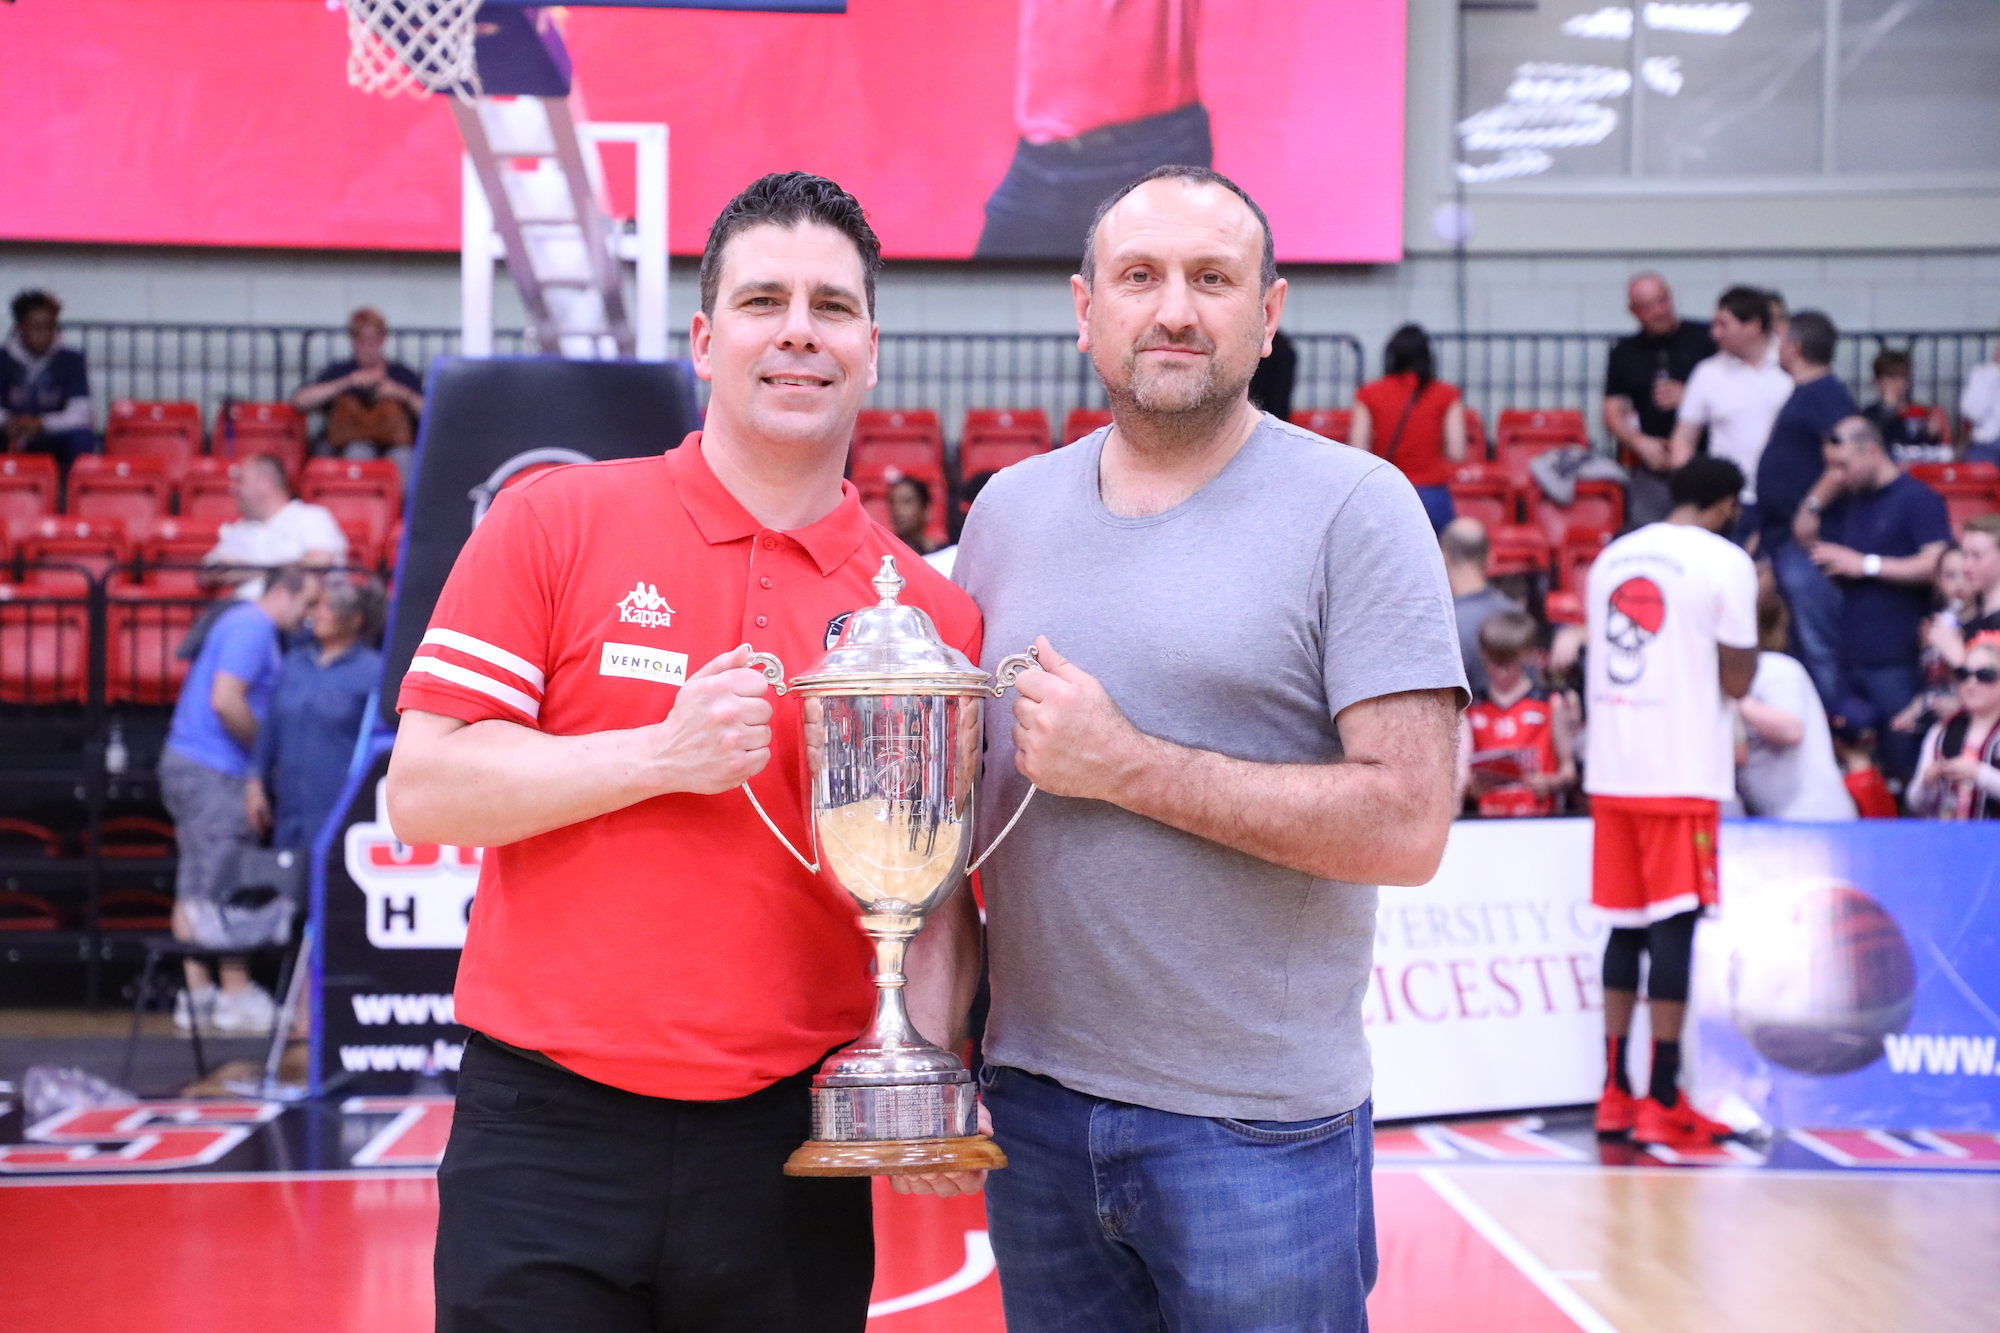 Ventola Projects Ltd completes sponsorship with Leicester Riders Basketball Club for a third season @VentolaLighting